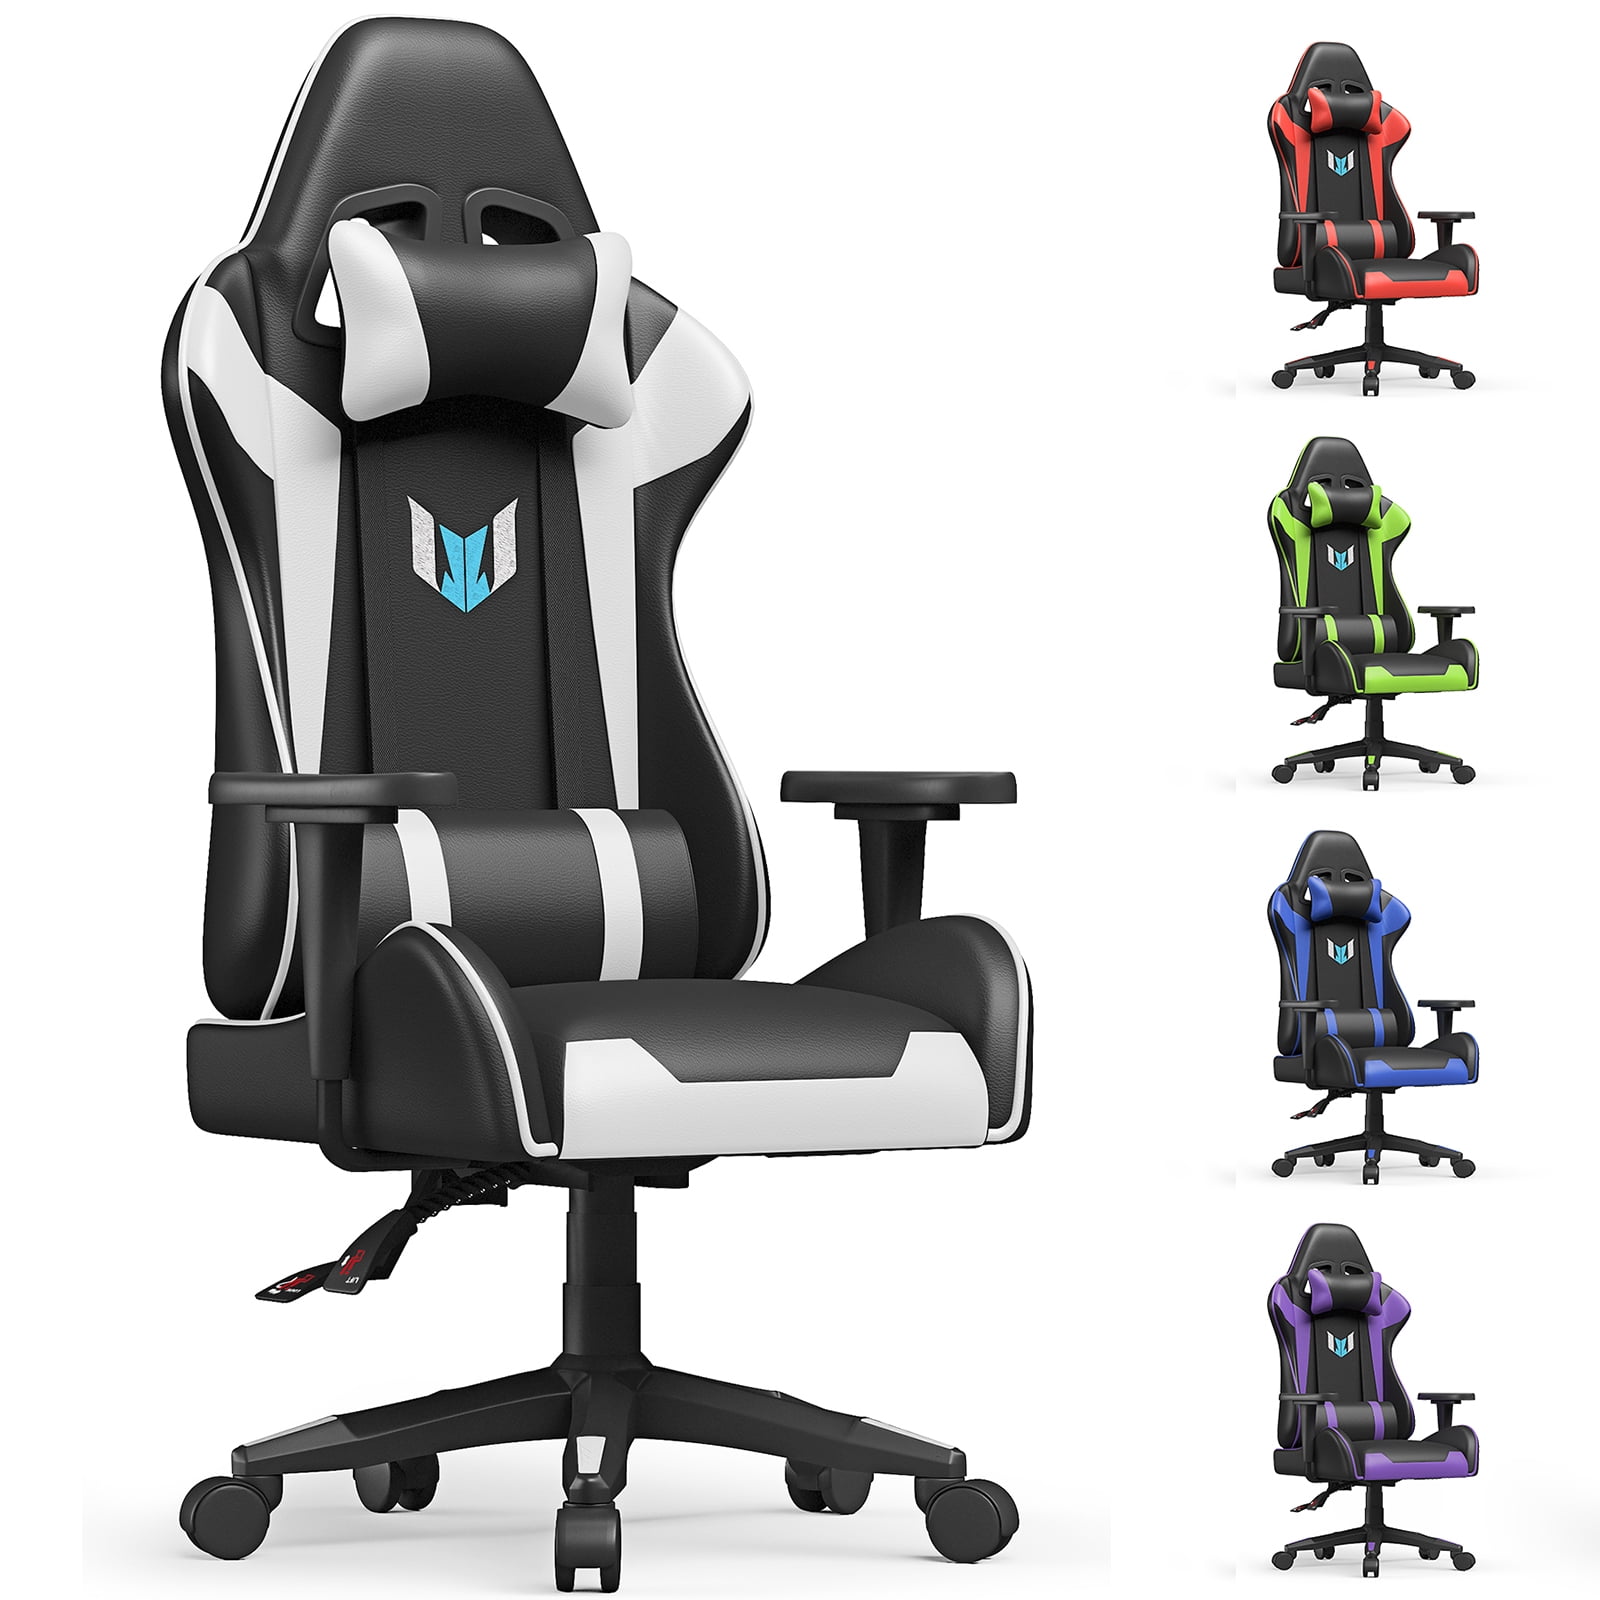 Flat gaming chair base with swivel function for Diablo